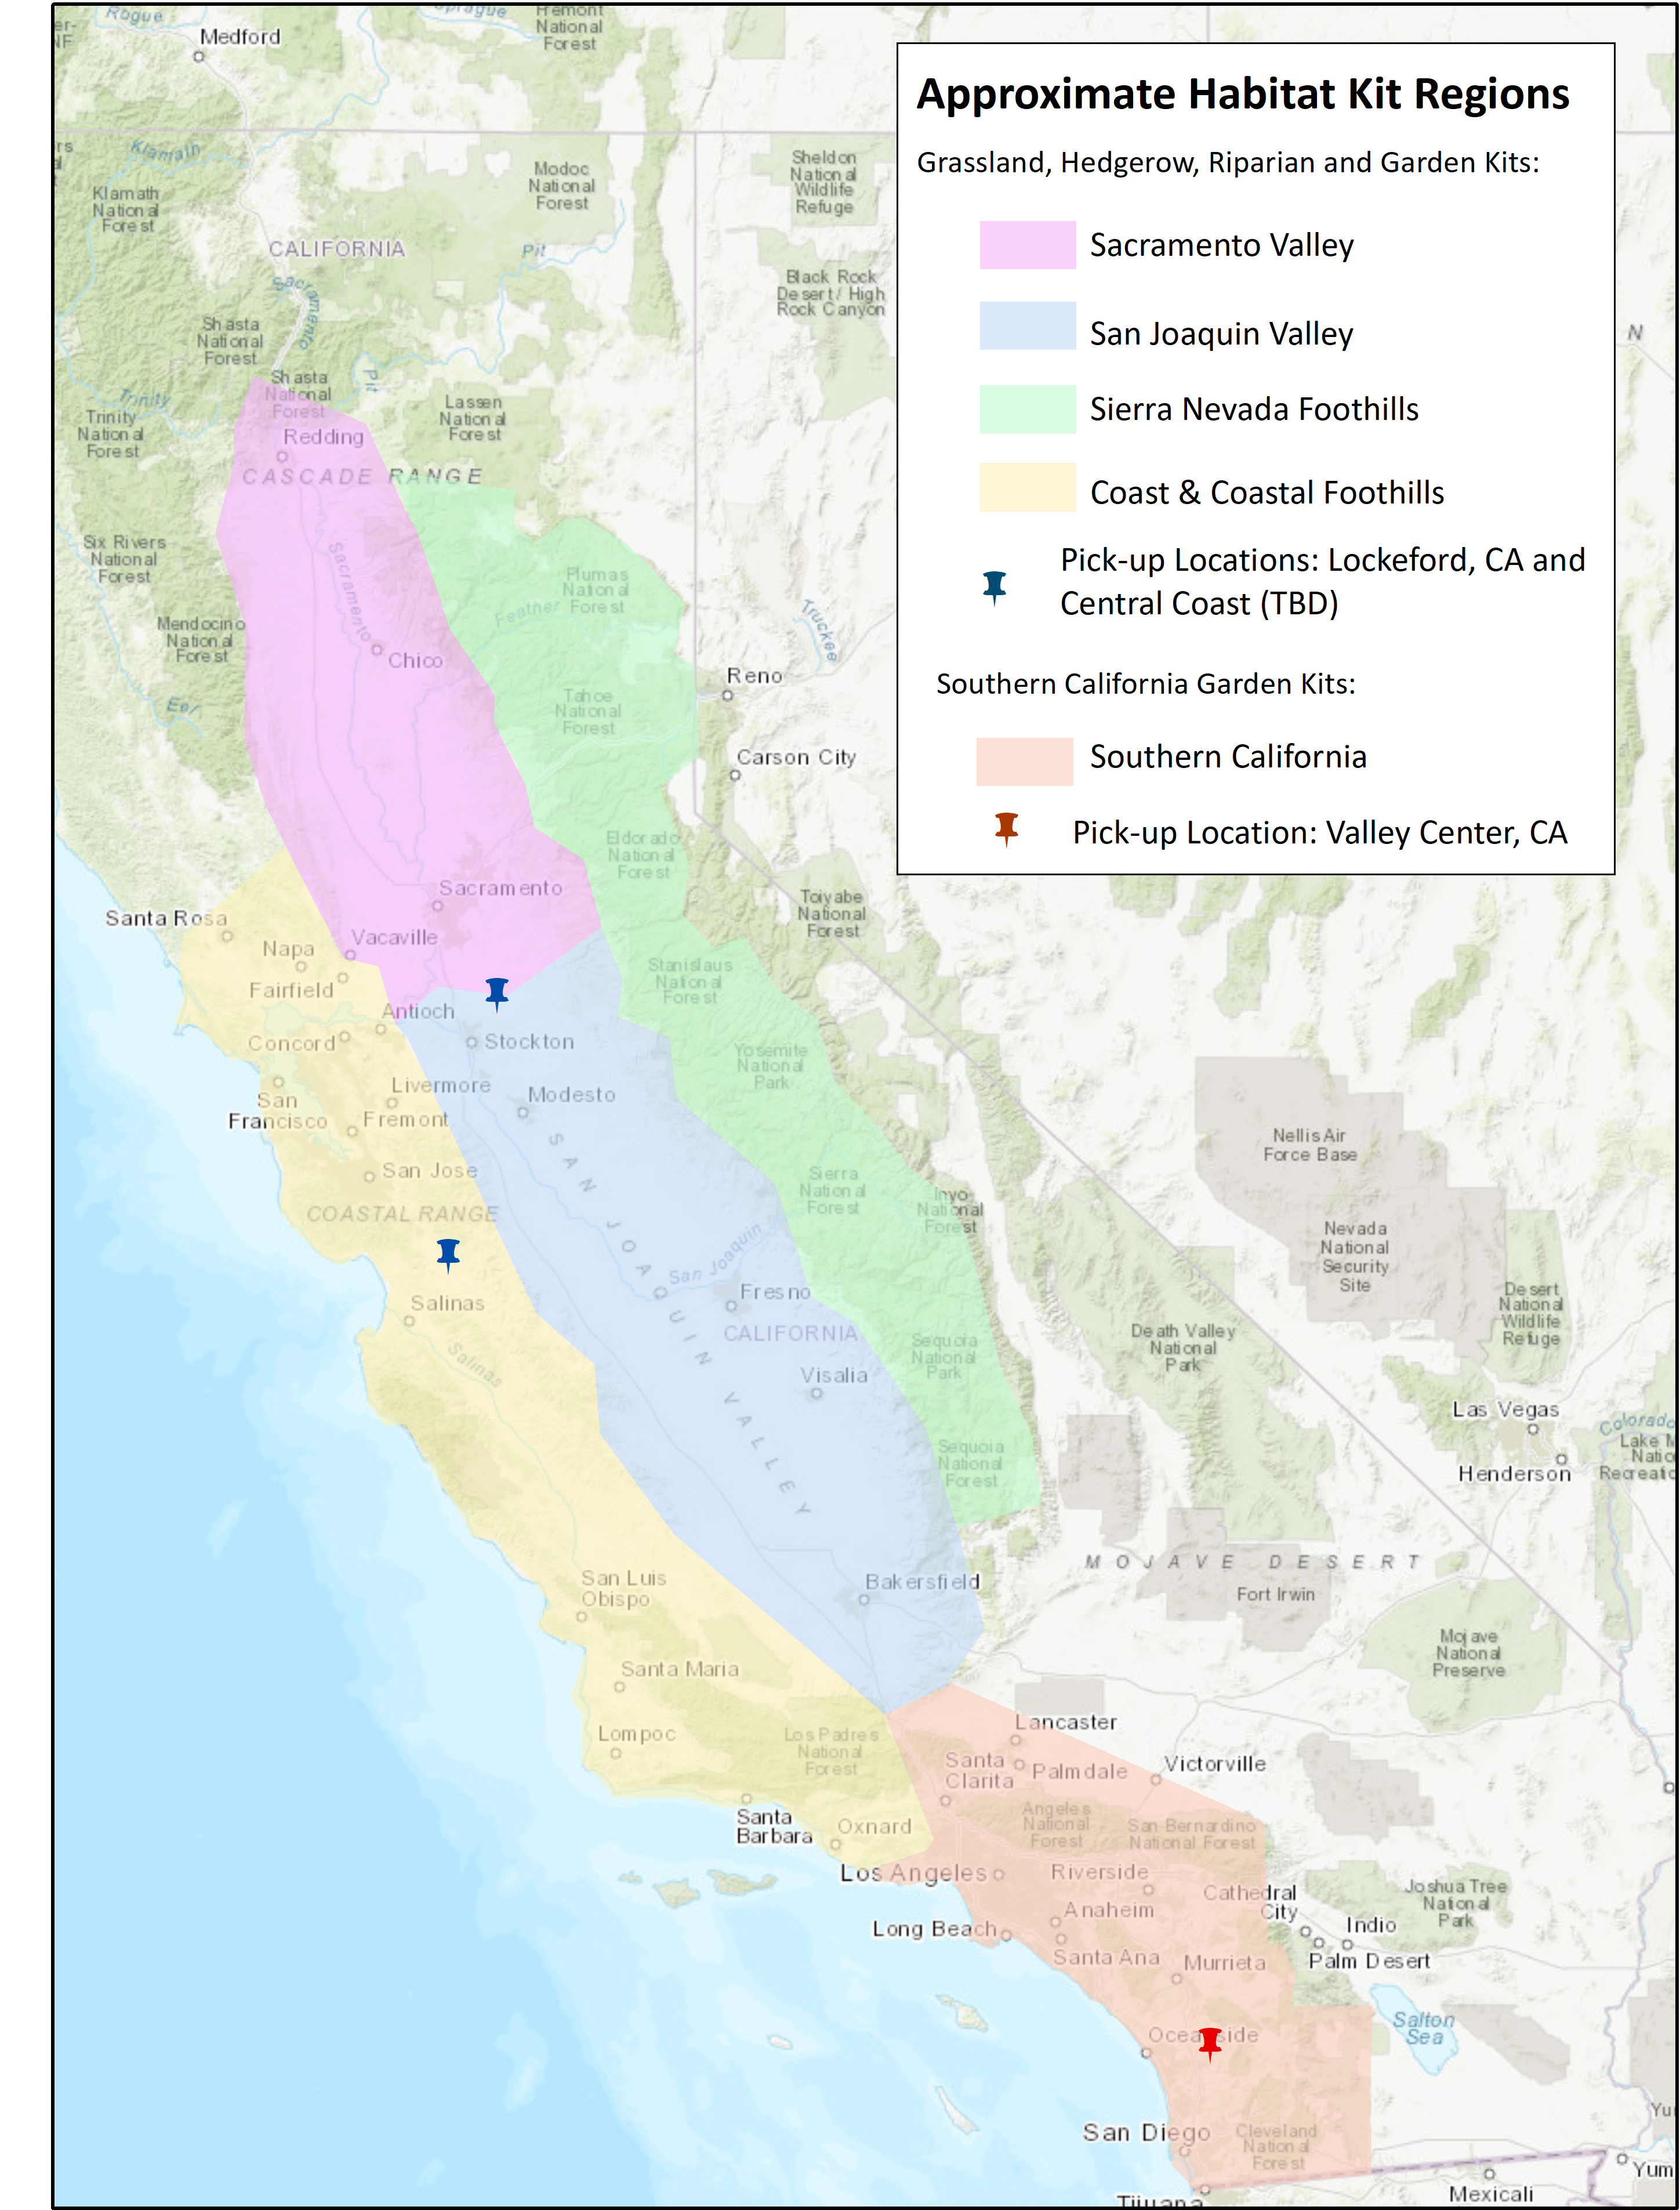 "Map of habitat kit regions in California, showing sites in the Sacramento, San Joaquin, Sierra Nevada Foothills, and Coast and Coastal Foothills regions, as well as Southern CA. Map includes pick-up sites in Lockeford, CA and Valley Center, CA. "